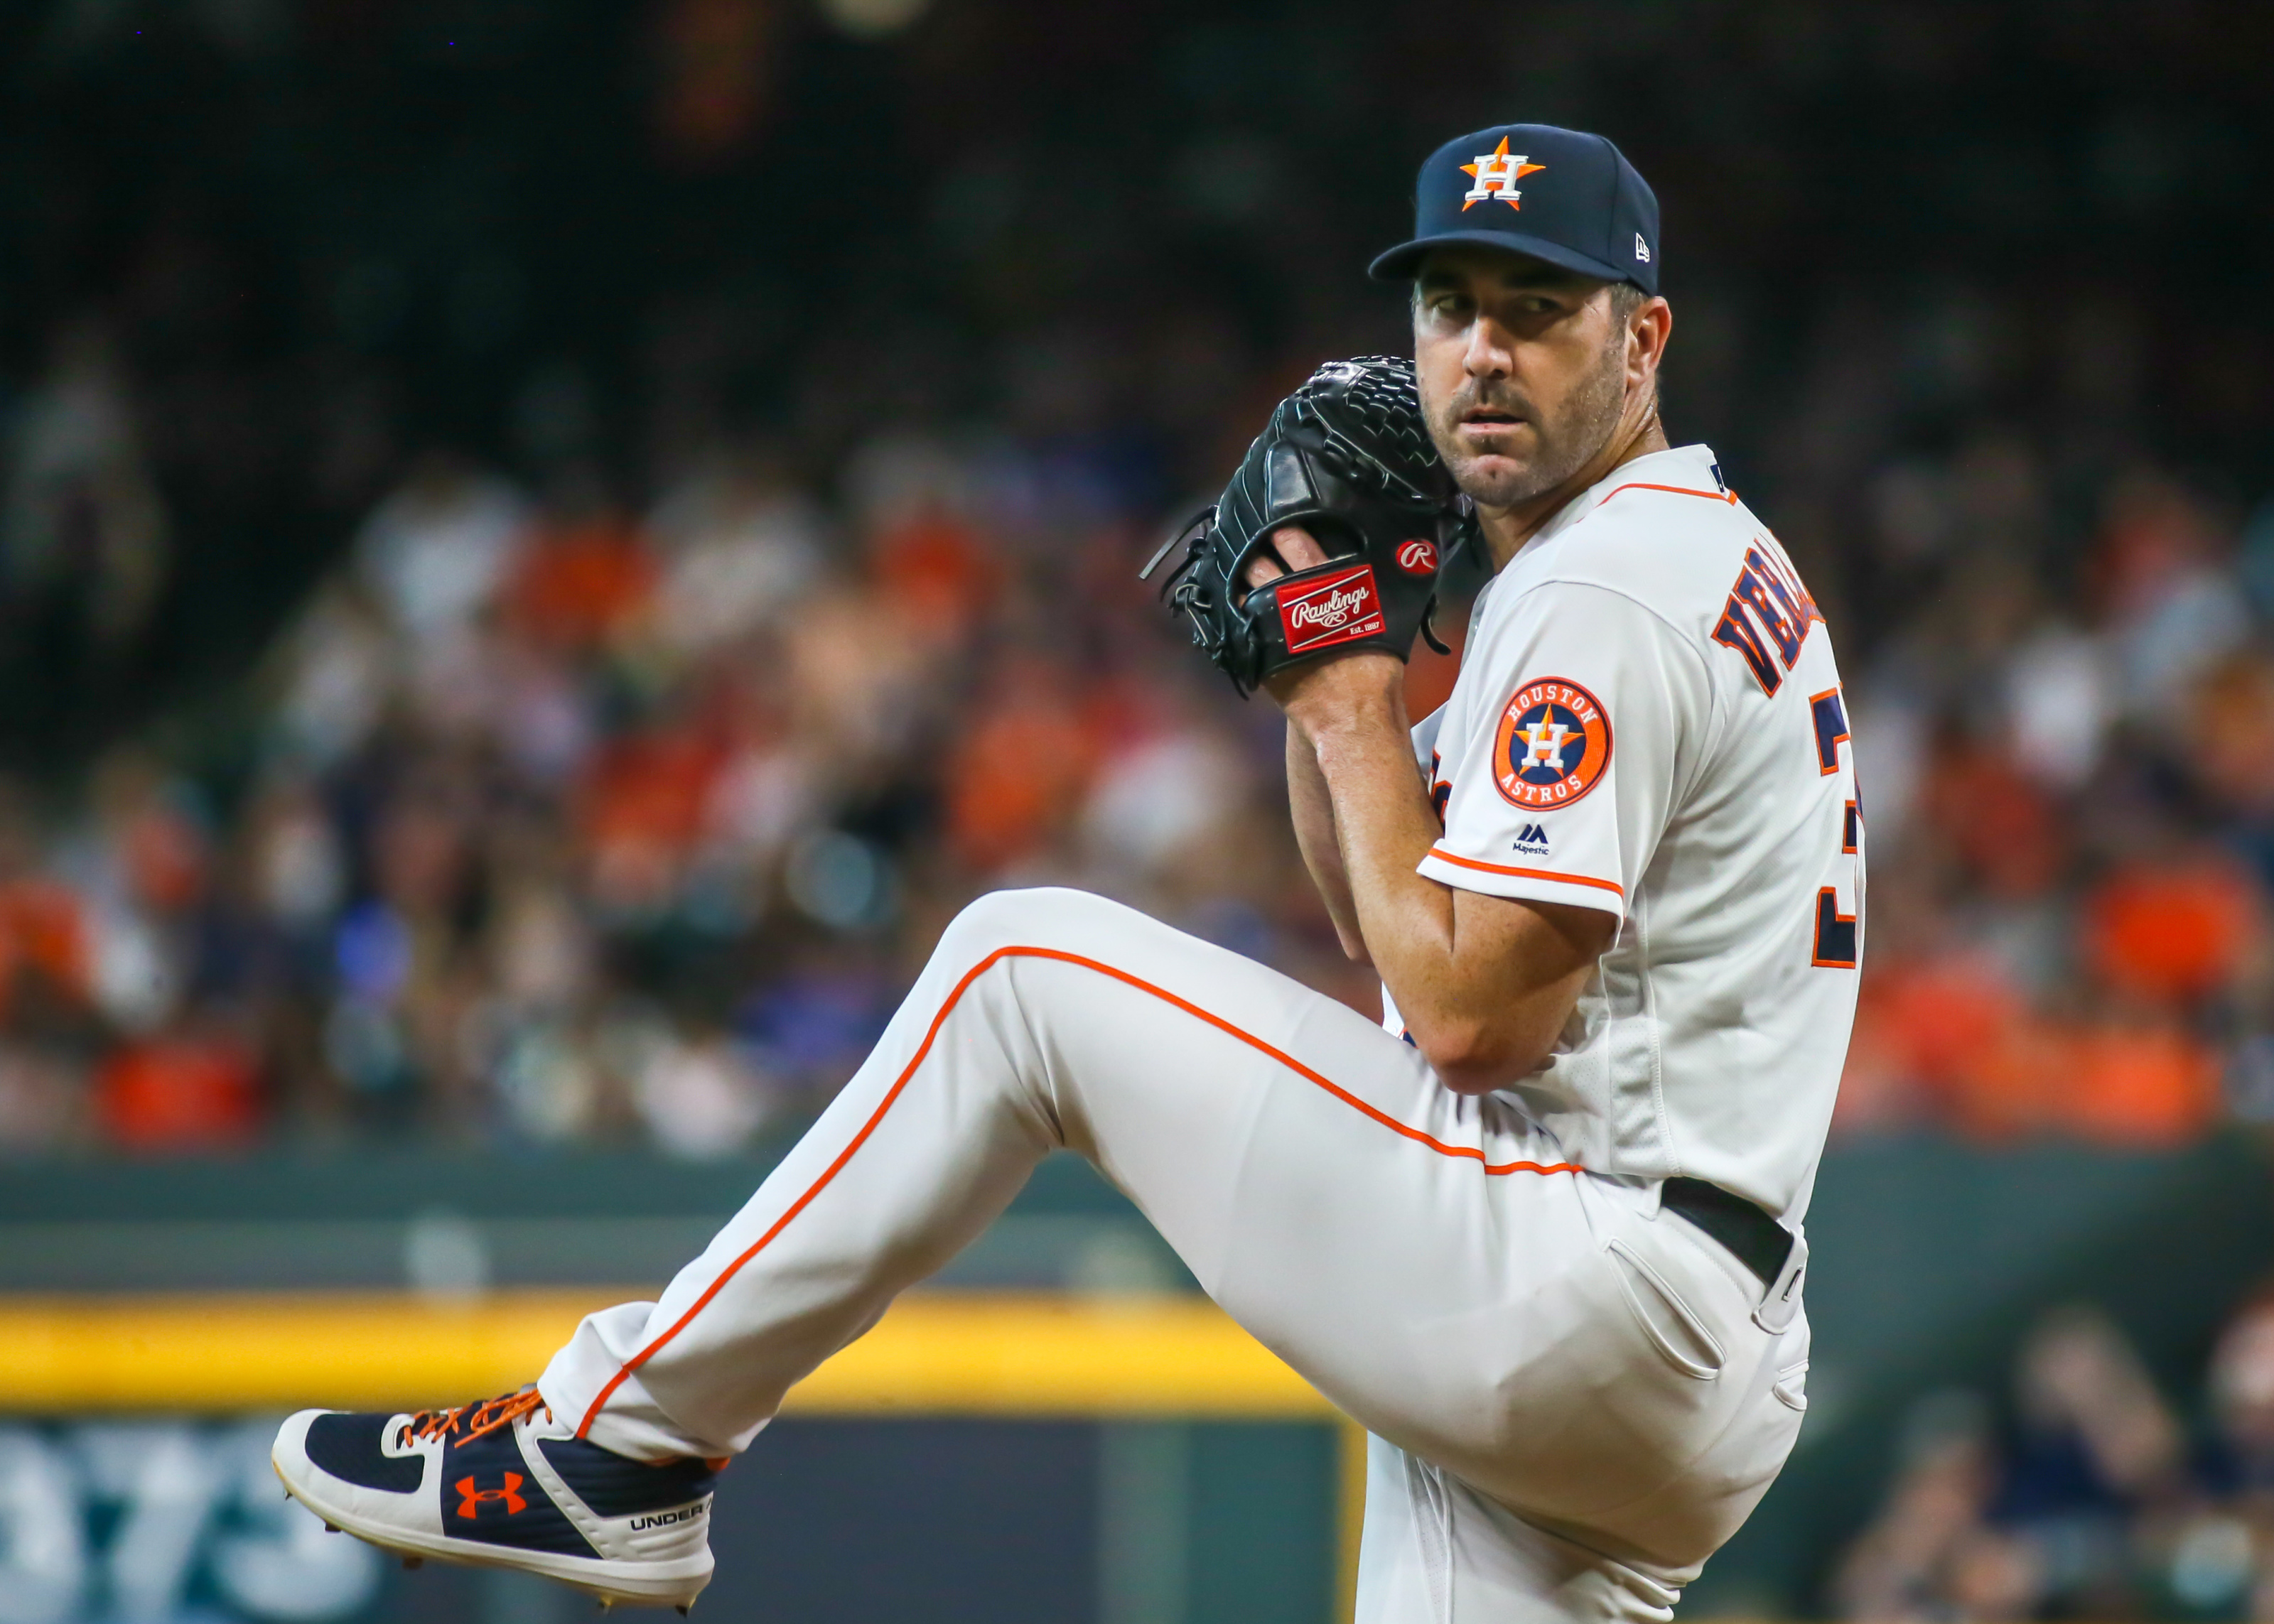 Houston Astros: A 2019 Justin Verlander stat is one of the best of